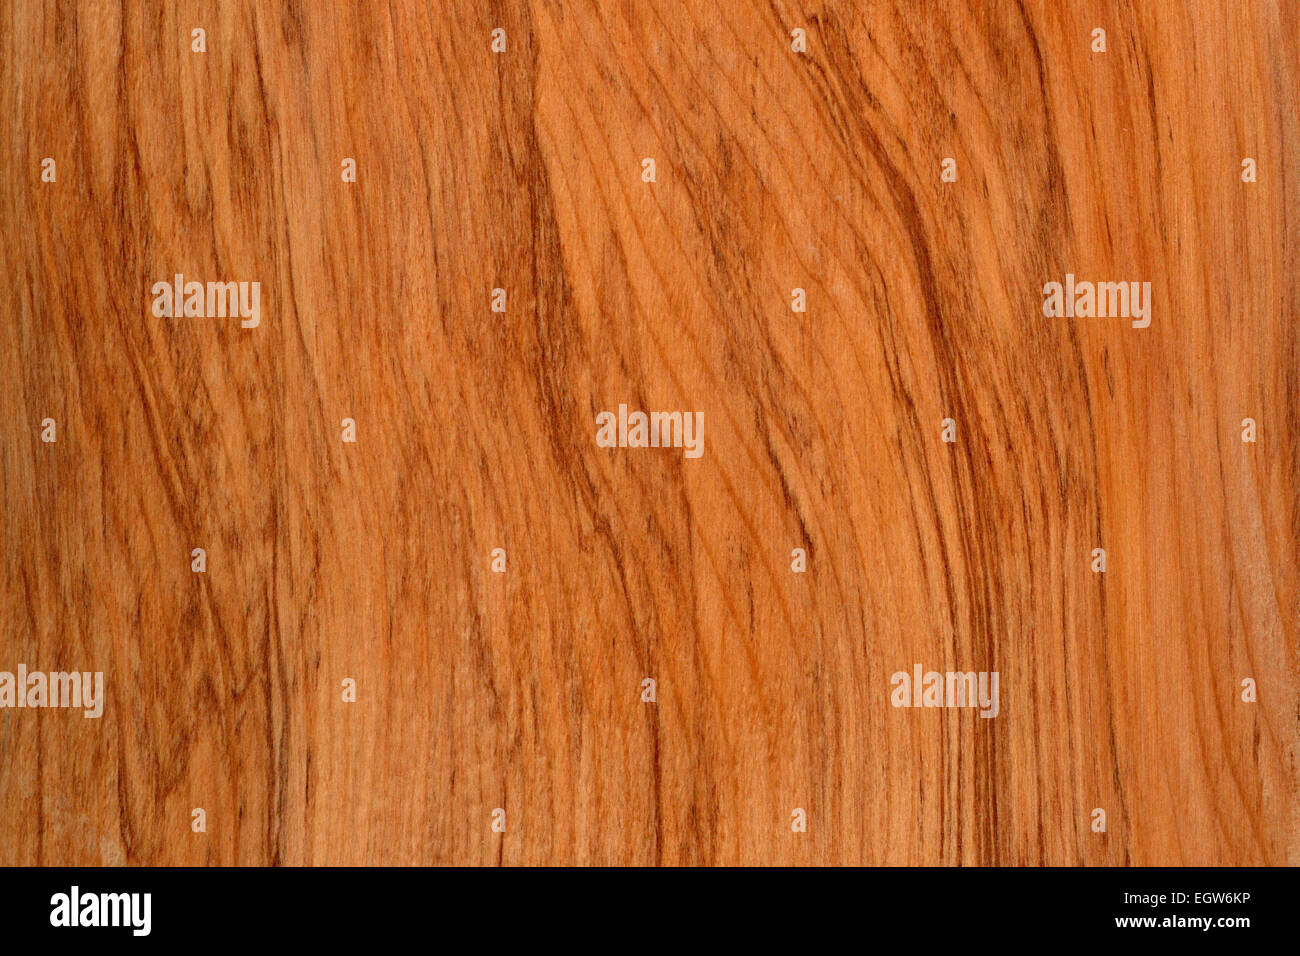 background of wood grain from New Zealand red pine, Dacrydium cupressinum, commonly known as rimu. Stock Photo